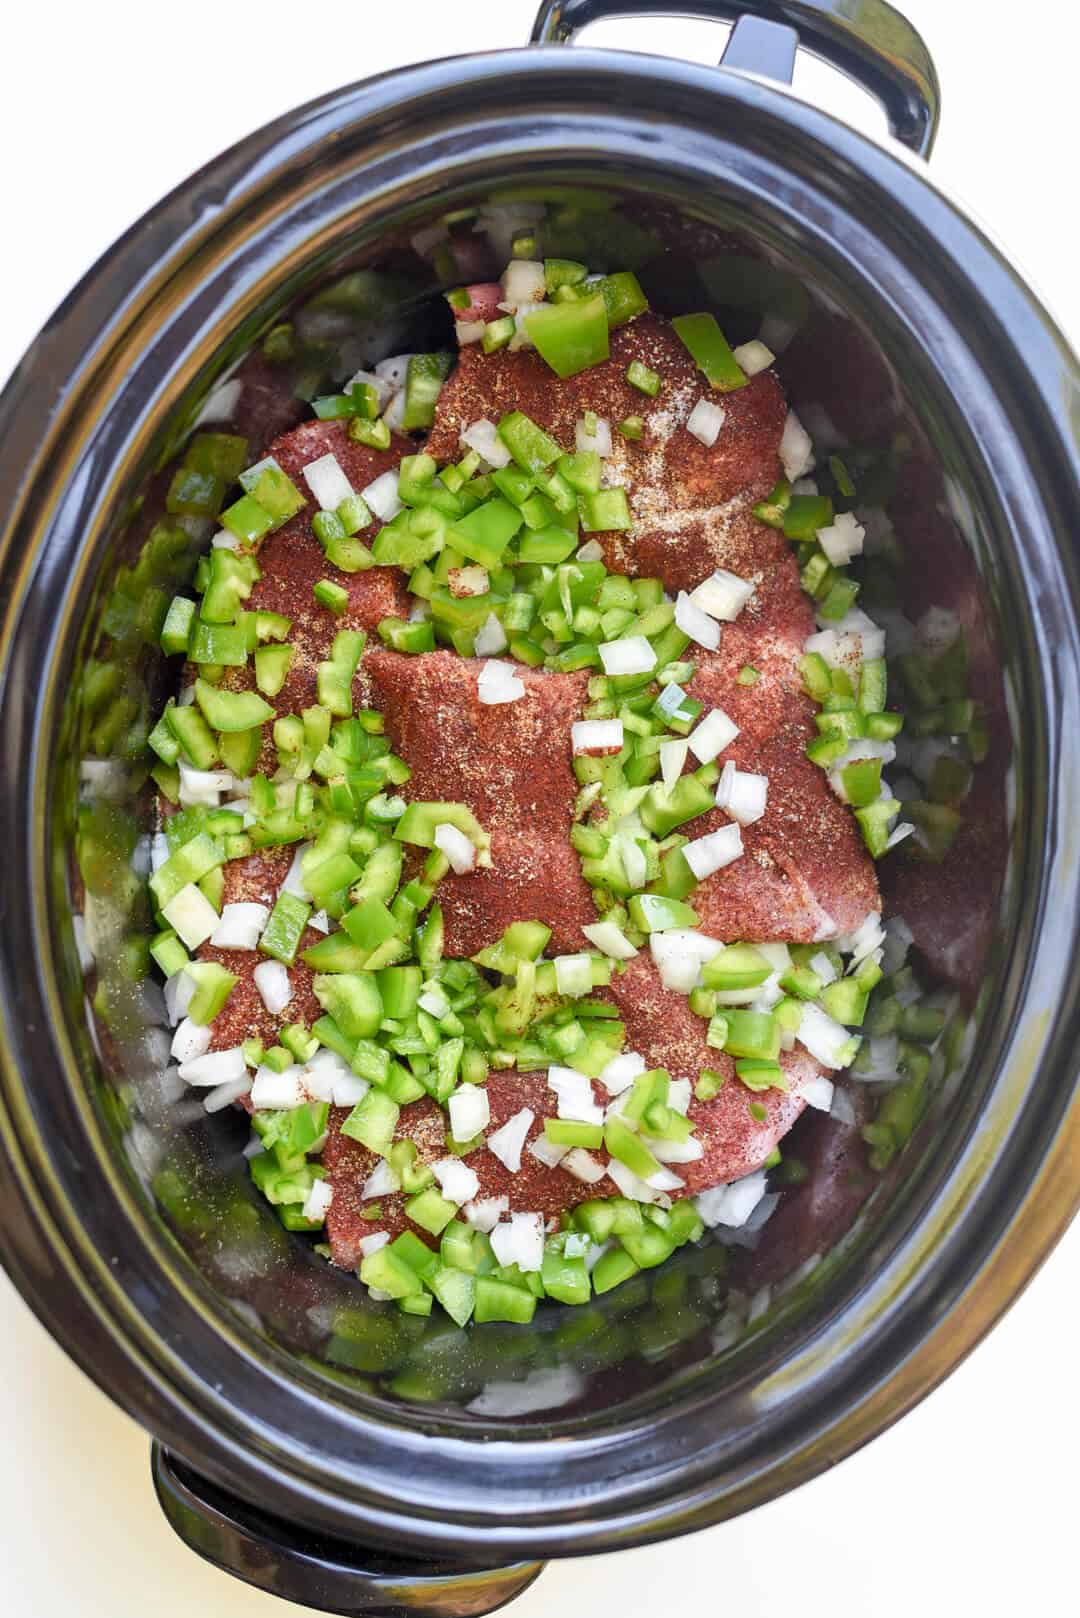 Chunks of pork topped with green bell pepper and onion in a slow cooker.